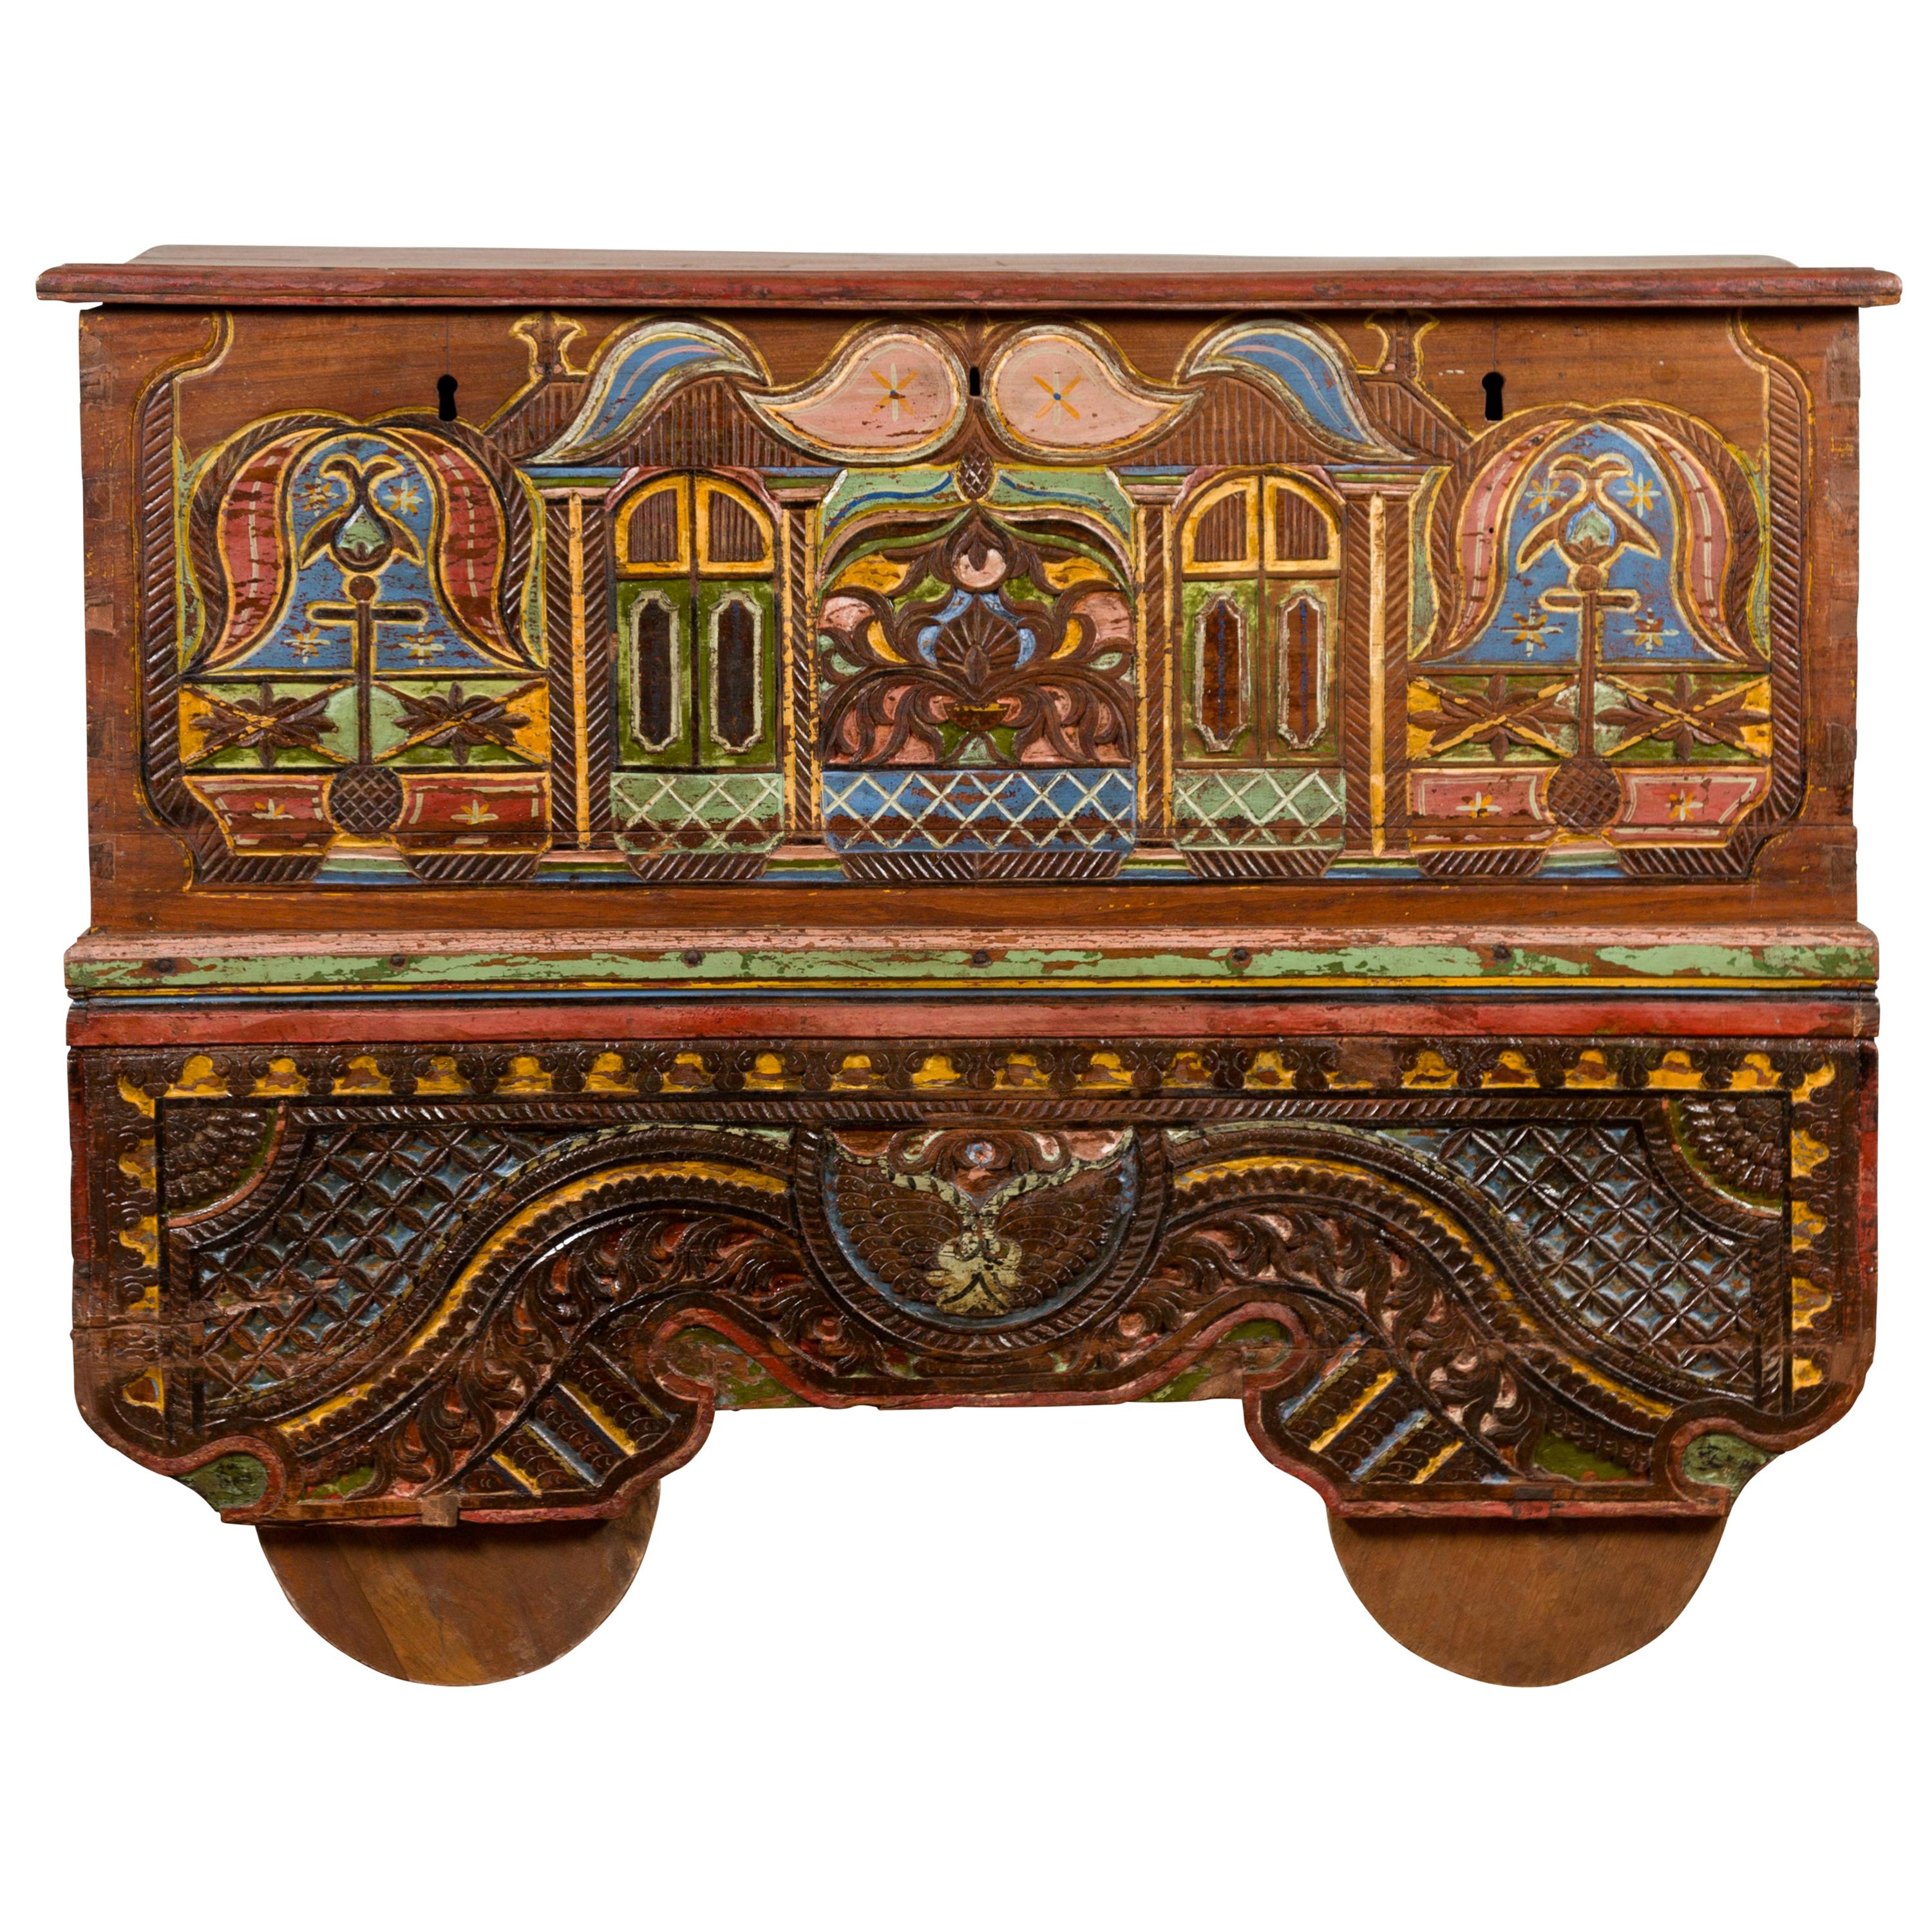 Indonesian Madurese 19th Century Polychrome Merchant's Blanket Chest on Wheels For Sale